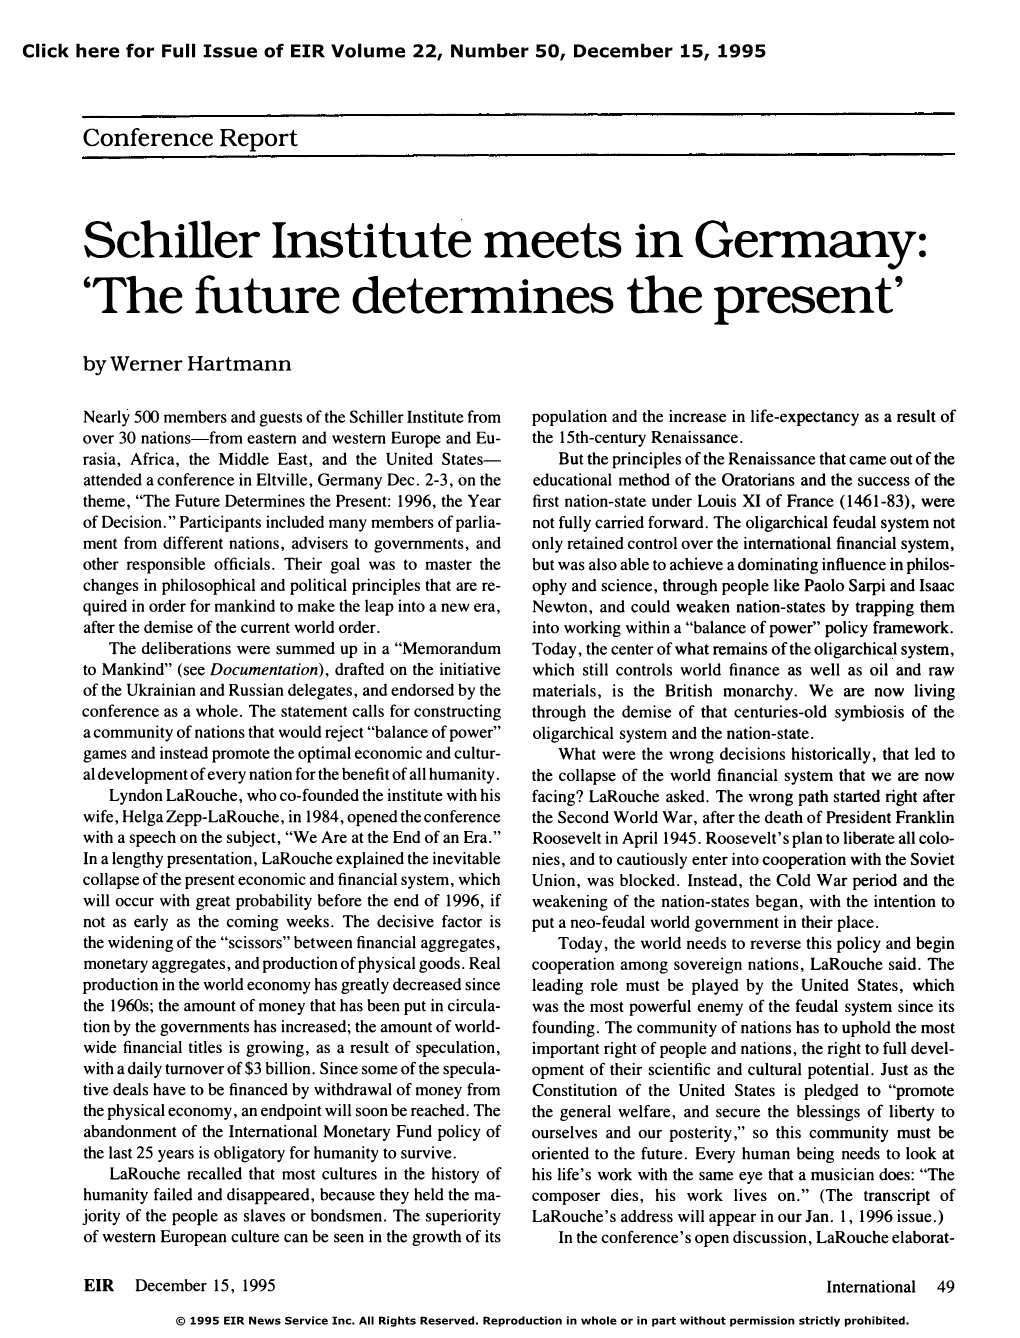 Schiller Institute Meets in Germany: 'The Future Determines the Present'